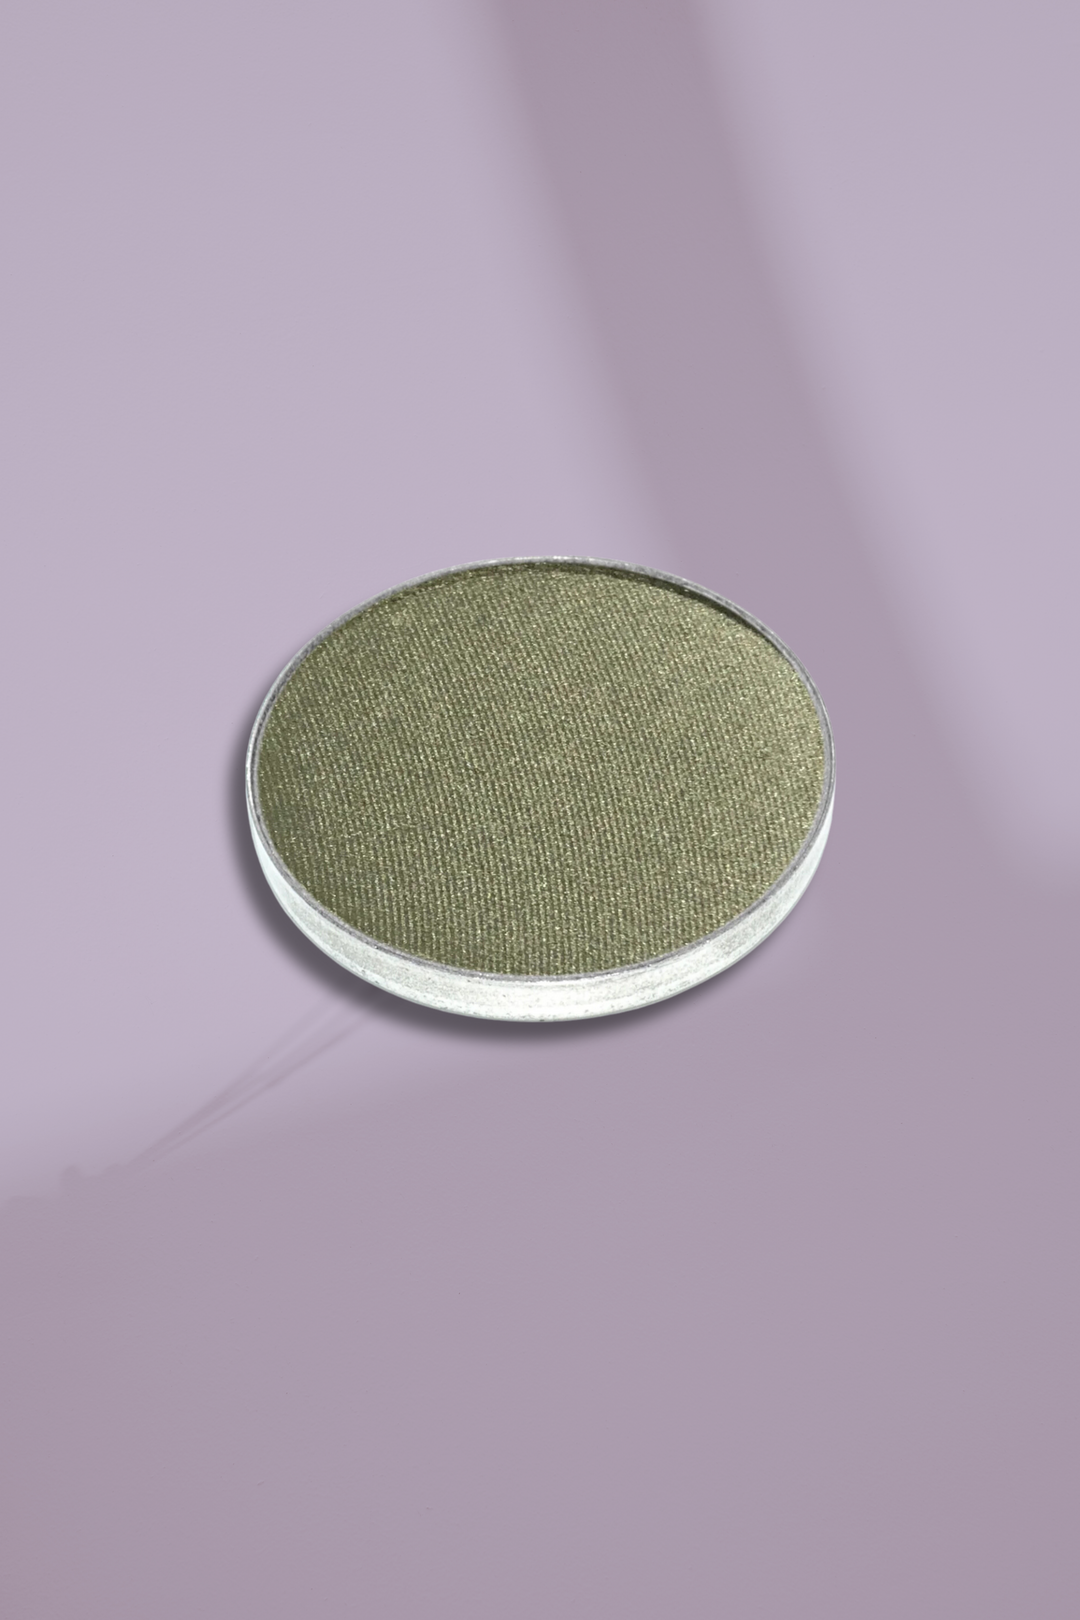 MINERAL PRESSED EYE COLOR REFILL | MATCHA